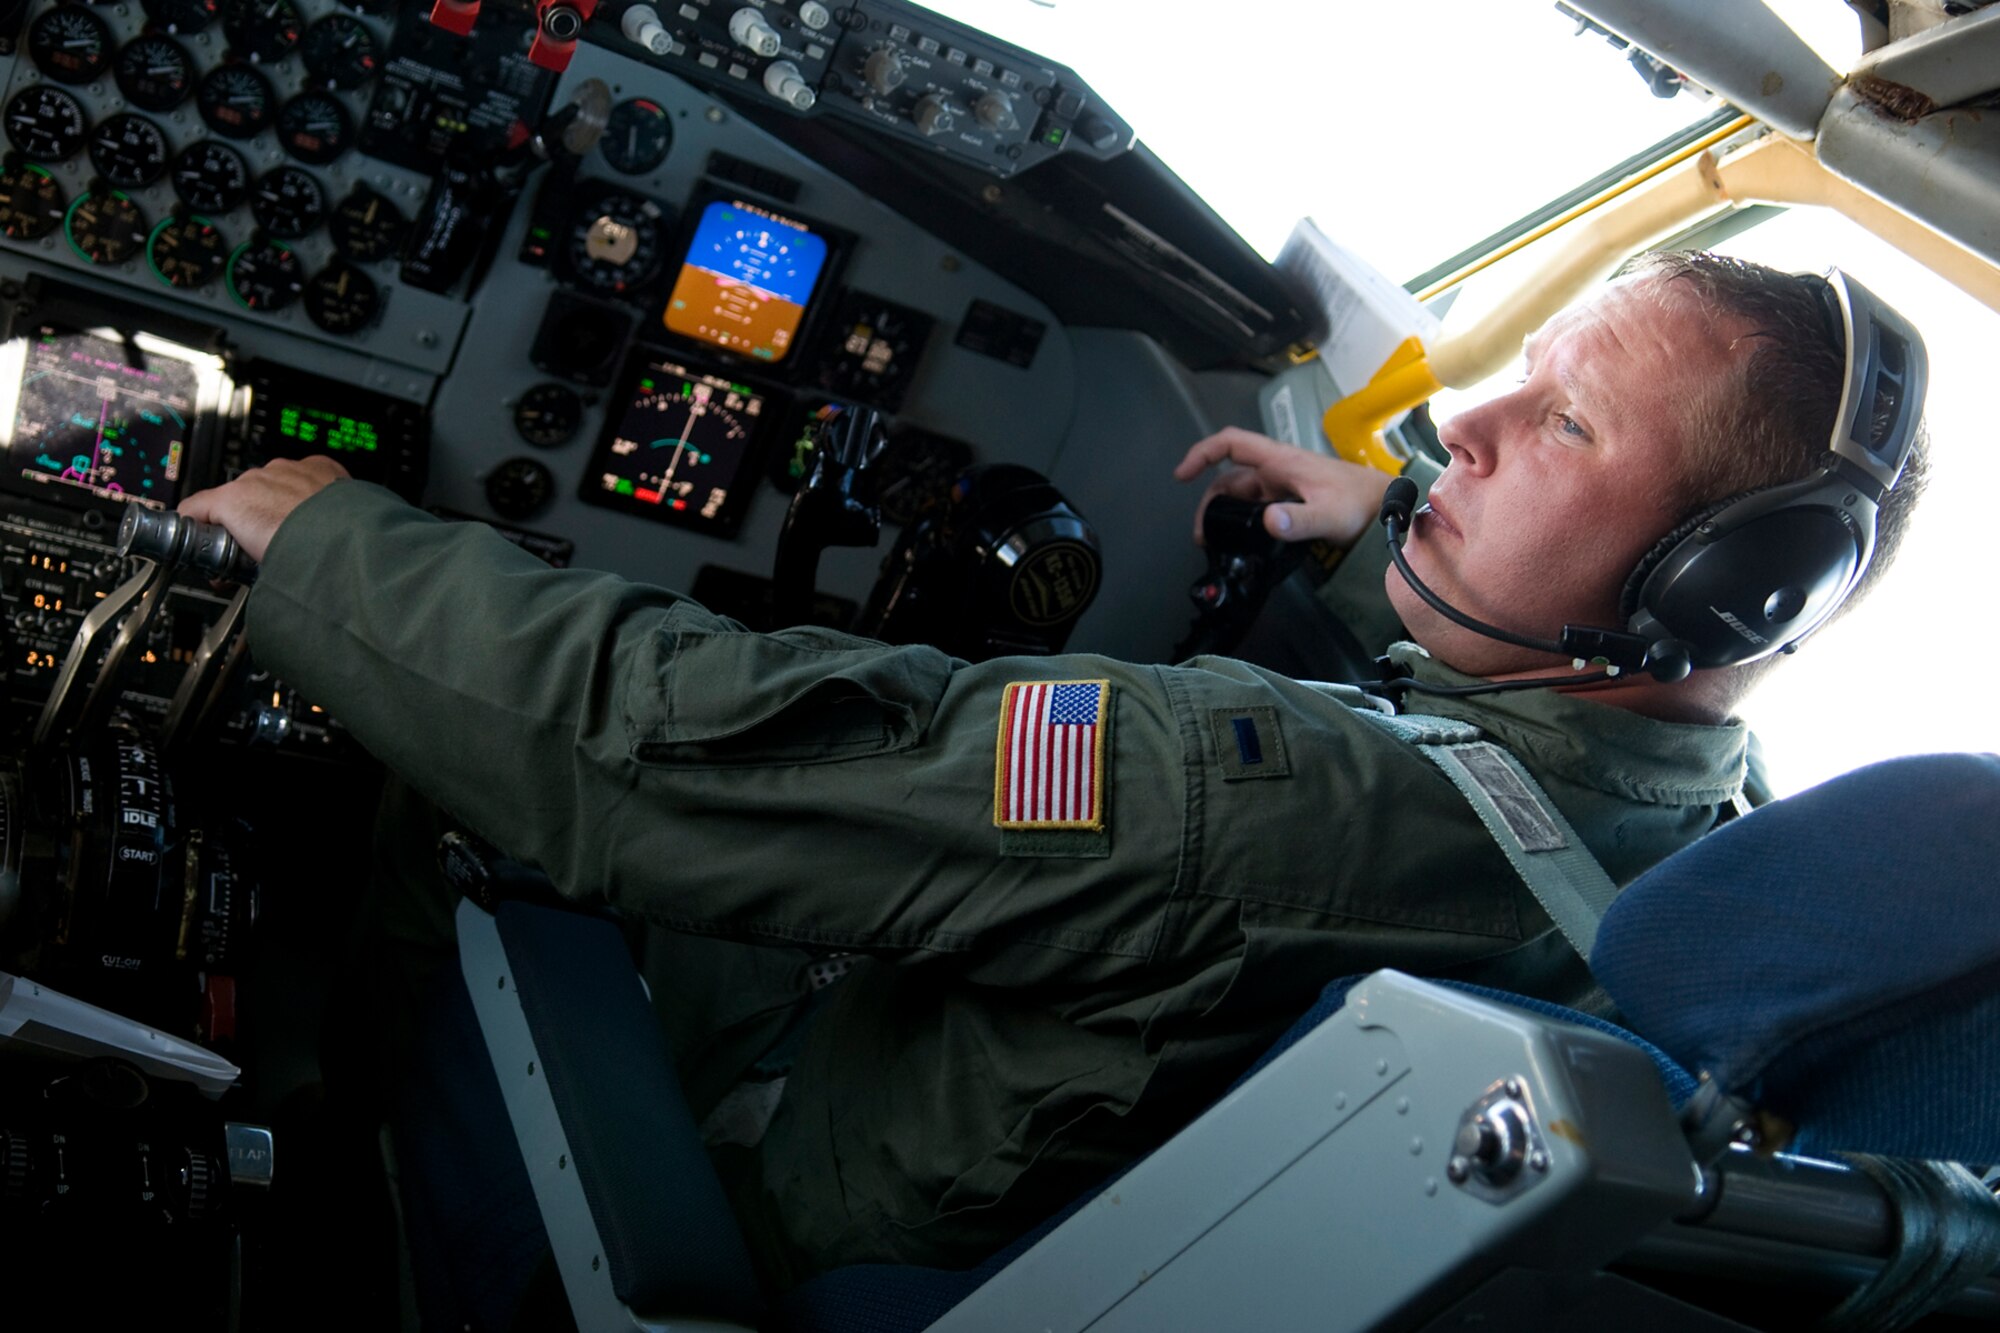 1st Lt. Jason Bireley, 72nd Air Refueling Squadron pilot, operates the controls of a KC-135R Stratotanker from Grissom Air Reserve Base, Ind., during an in-flight refueling mission over southern Indiana Sept. 13, 2013. Bireley and the KC-135 crew refueled two French Air Force Mirage 2000Ds as part of Bold Quest 13.2, a coalition capability demonstration and assessment exercise, which fosters resource pooling, collaborative data collection and analysis to inform capability development. (U.S. Air Force photo/Tech. Sgt. Mark R. W. Orders-Woempner) 
